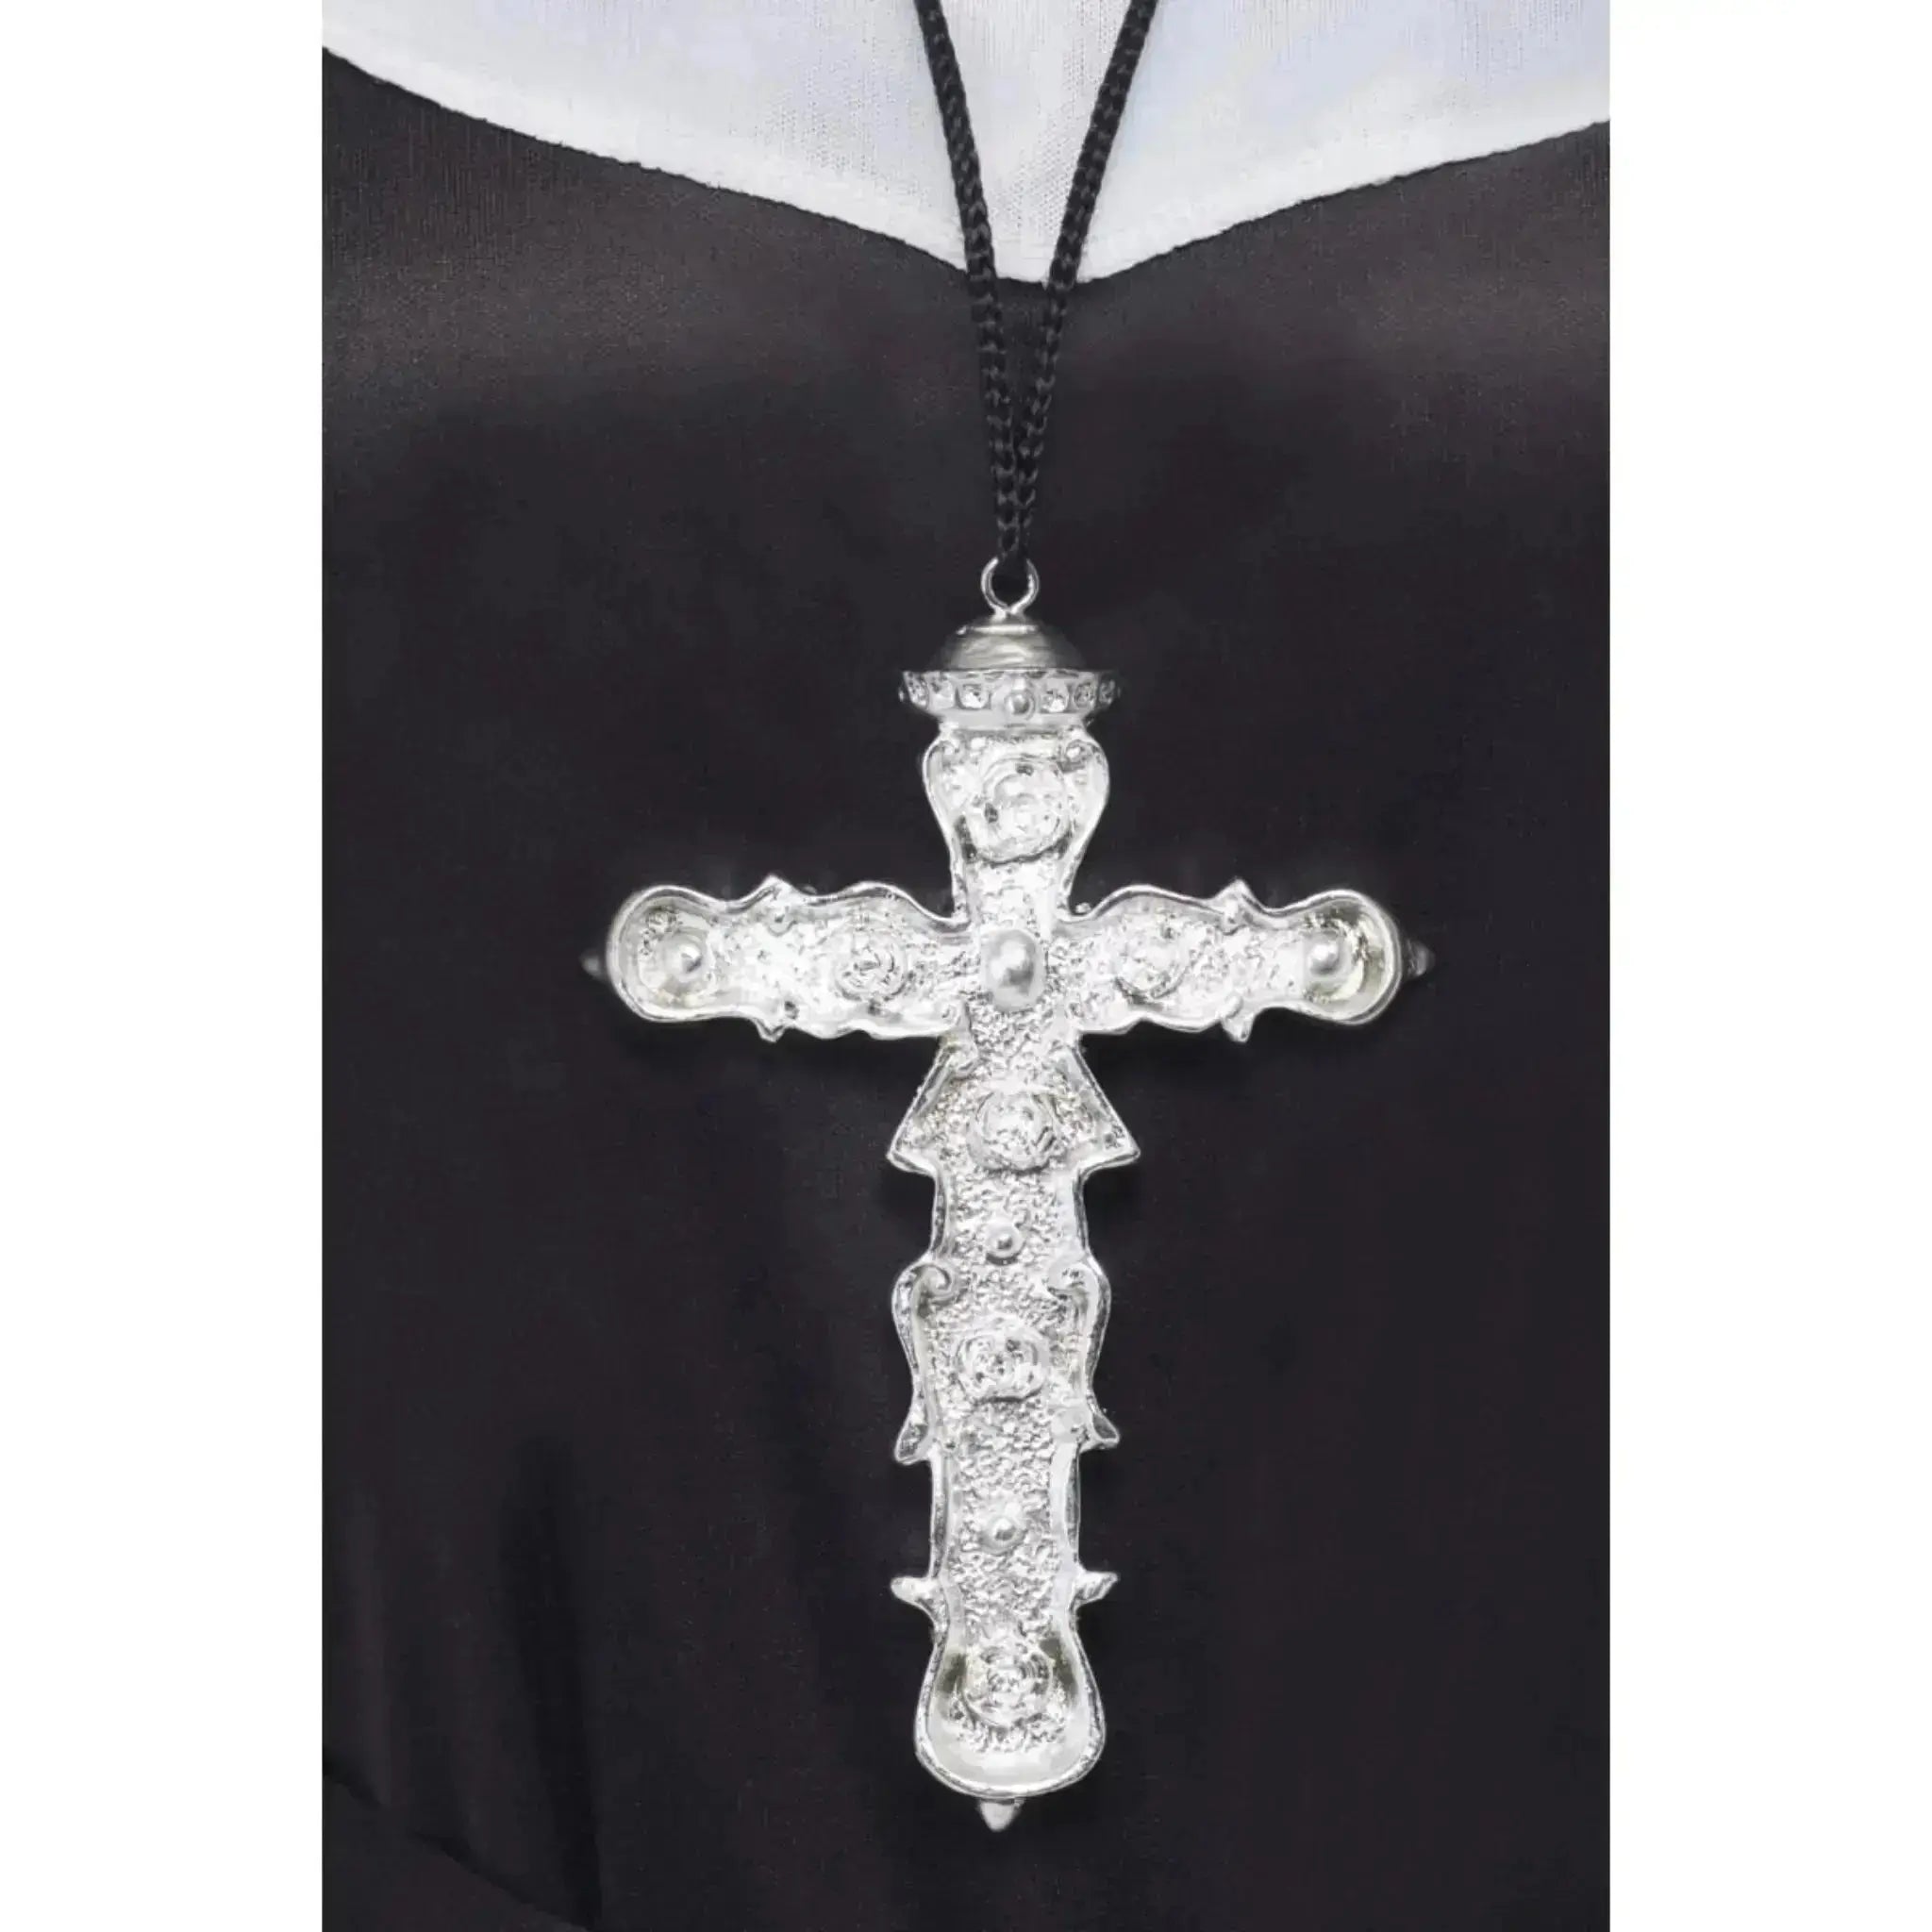 Nuns Cross Necklace | The Party Hut